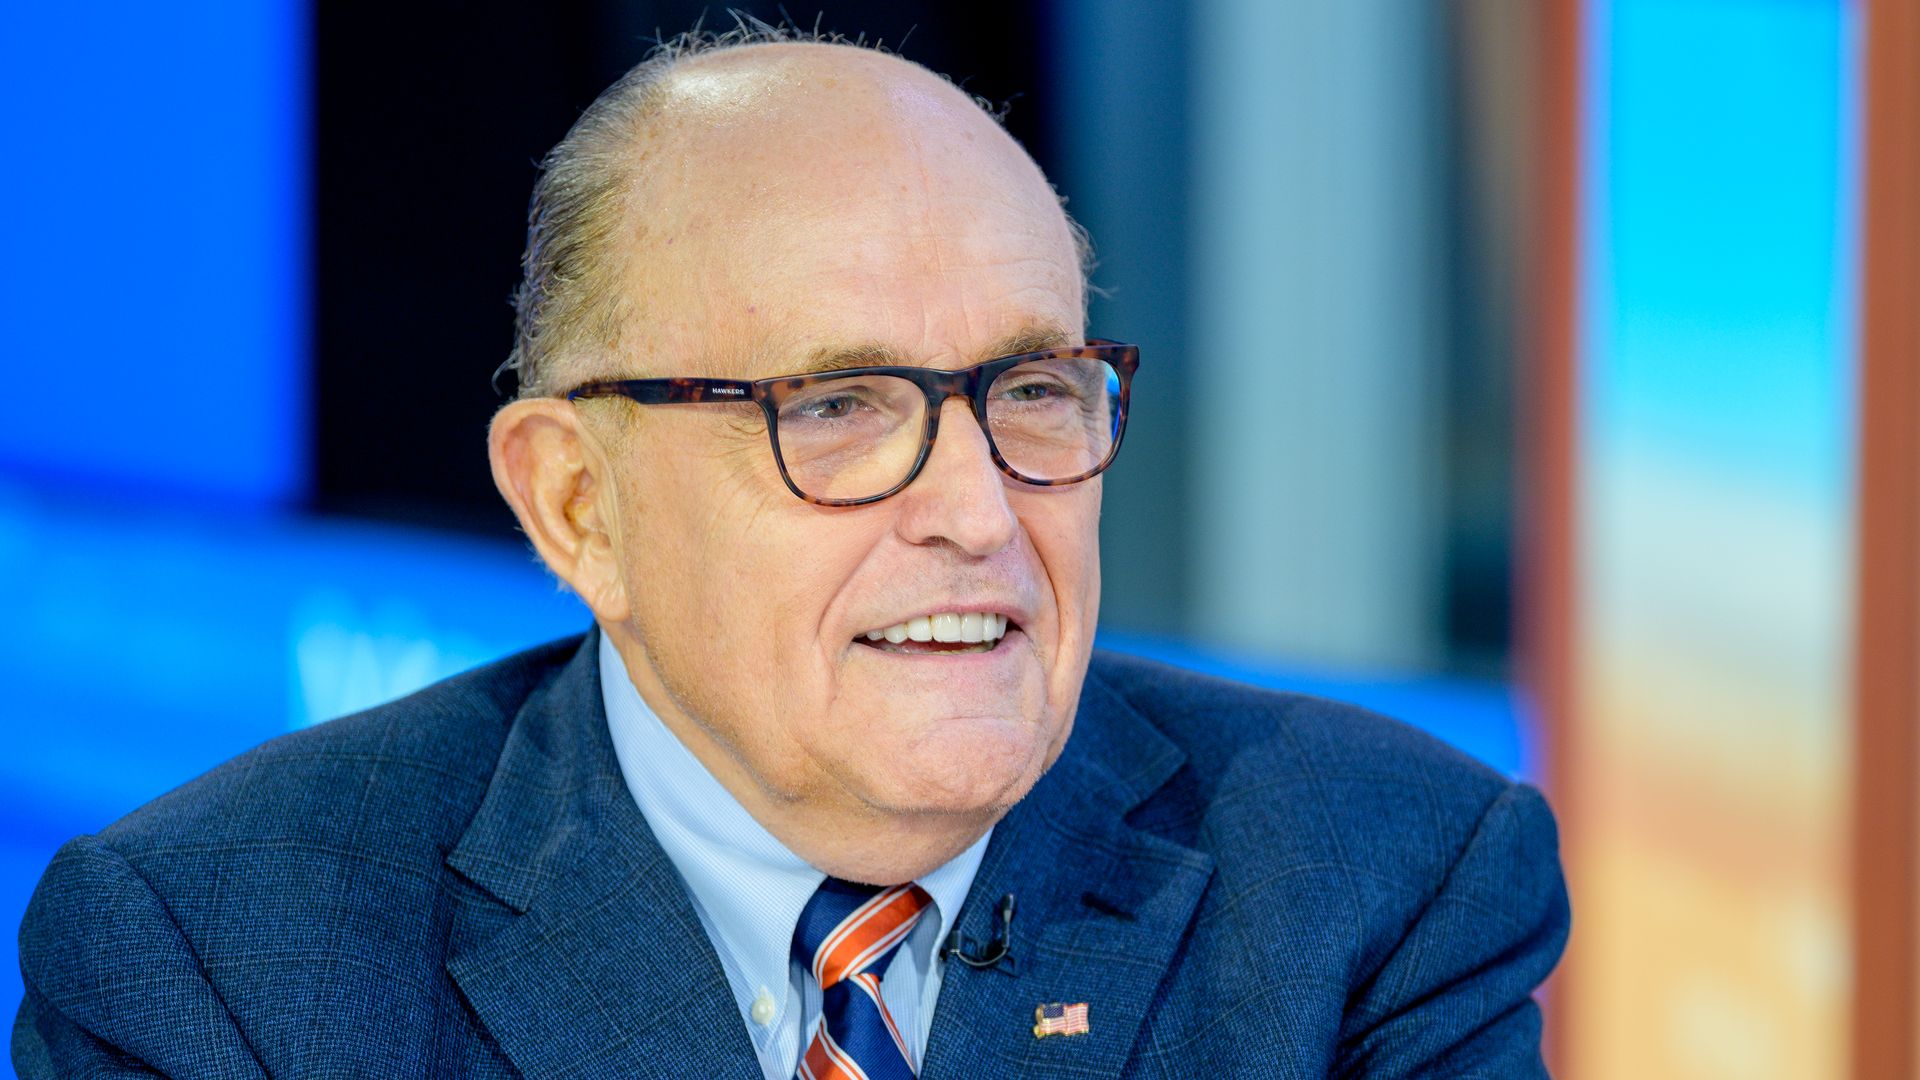 In this image, Giuliani wears a suit and glasses and smiles